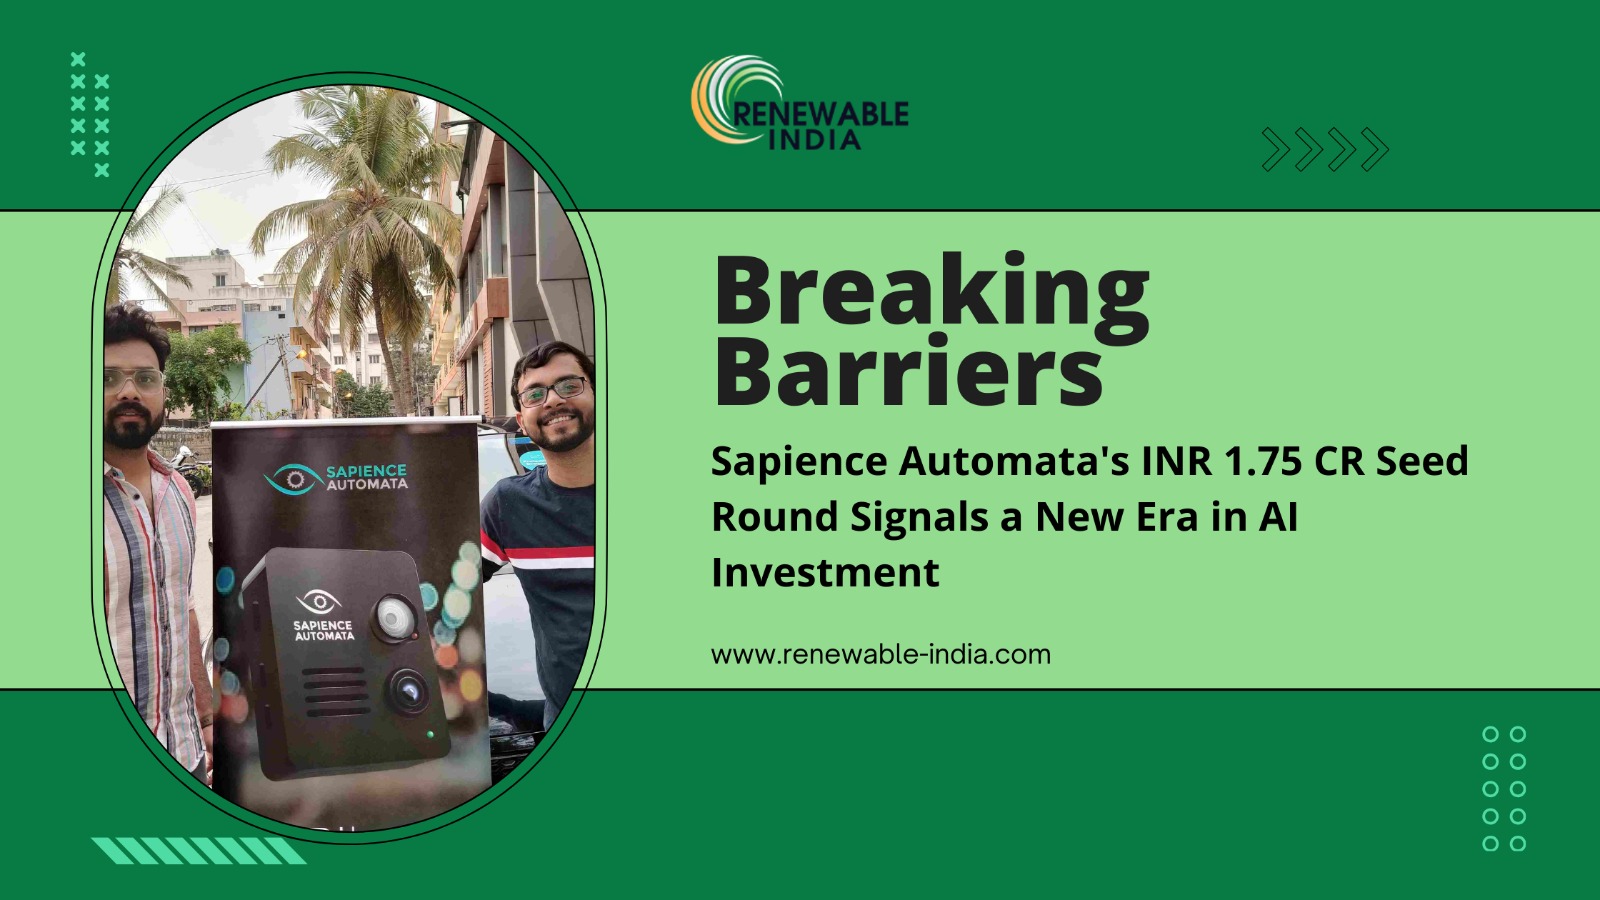 Sapience Automata raises INR 1.75 CR in Seed Round led by Inflection Point Ventures